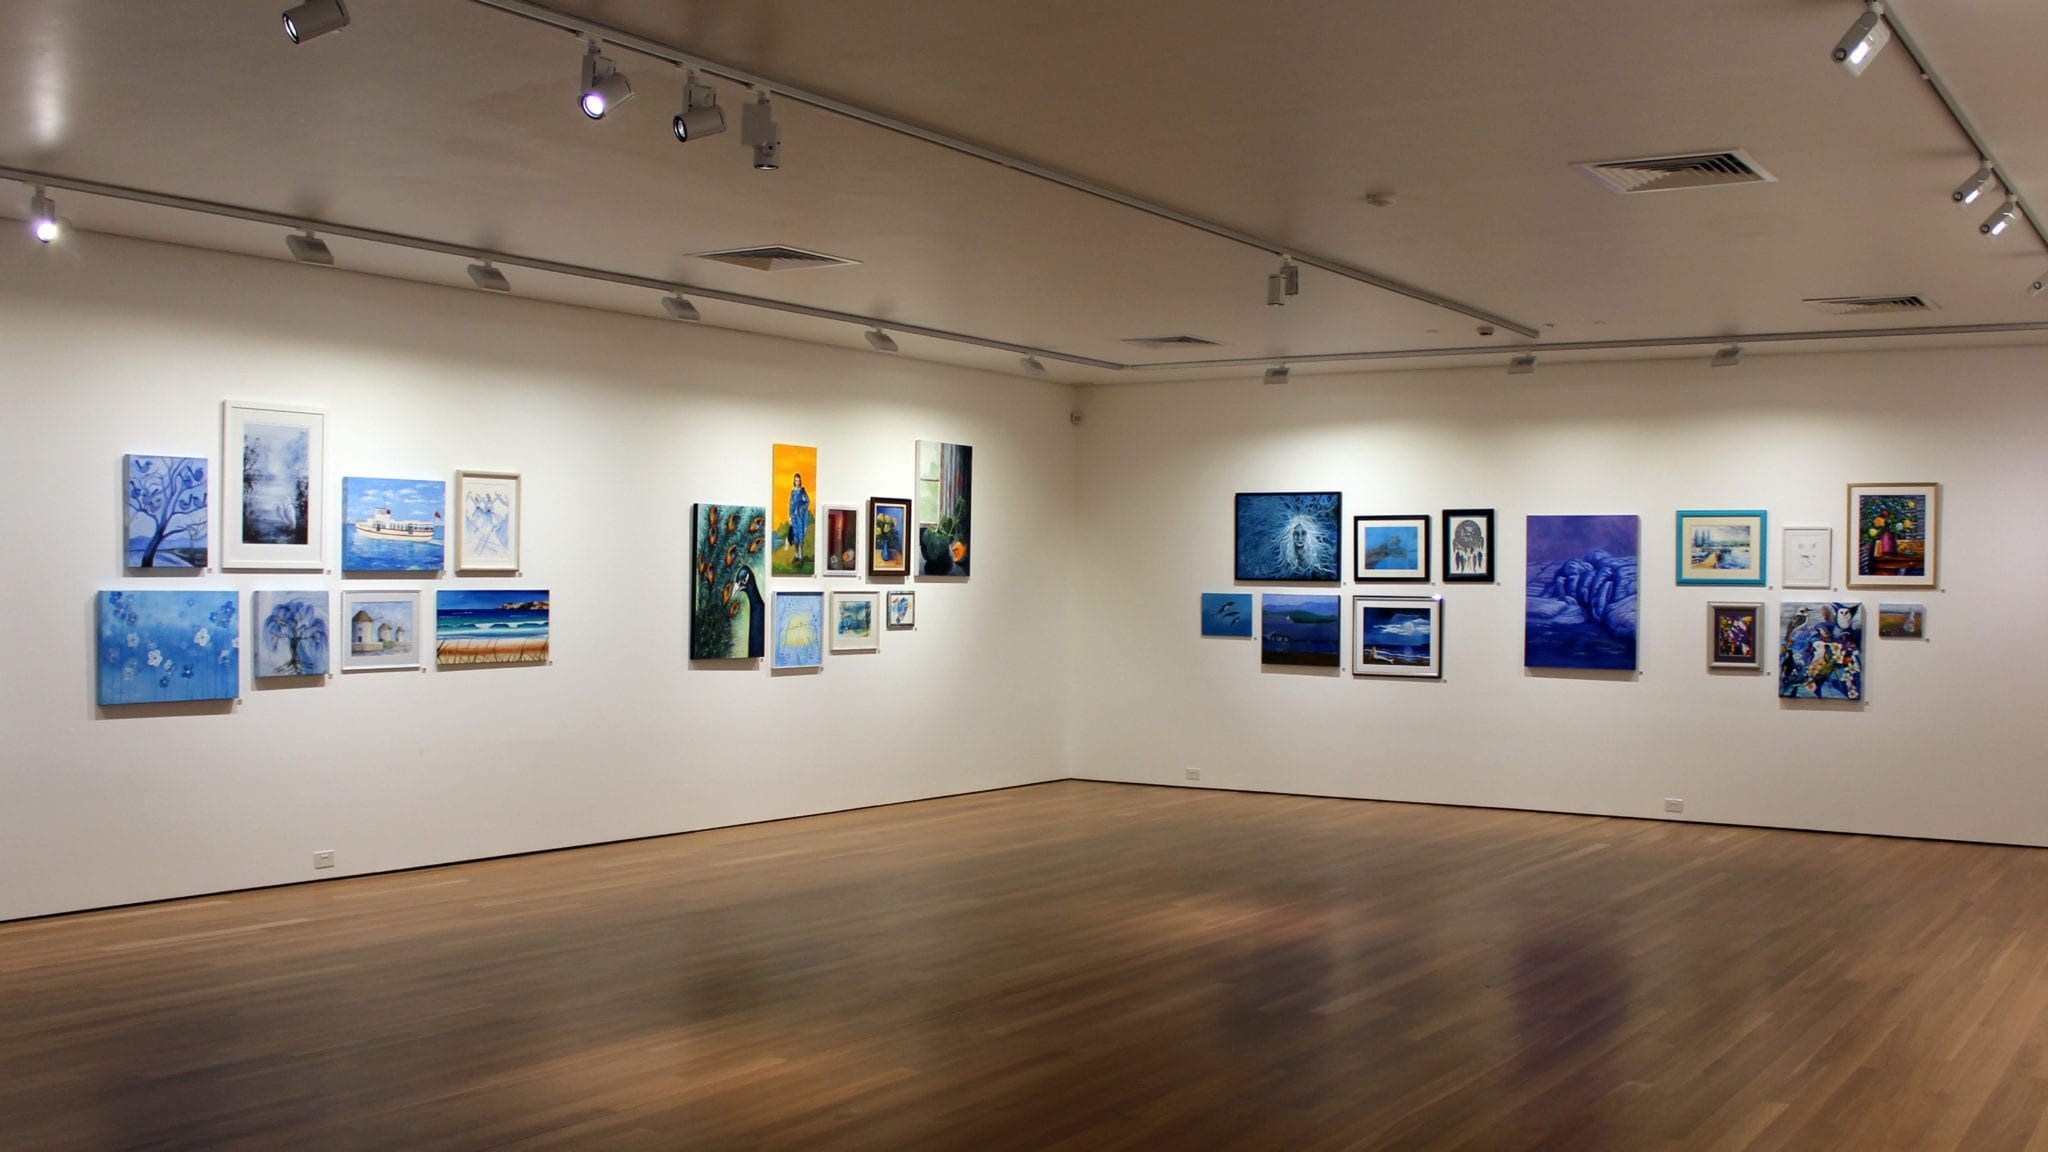 Exhibition documentation of Blue by Latrobe City Art Groups, 16 March to 18 April 2019, Gallery 6, Latrobe Regional Gallery.